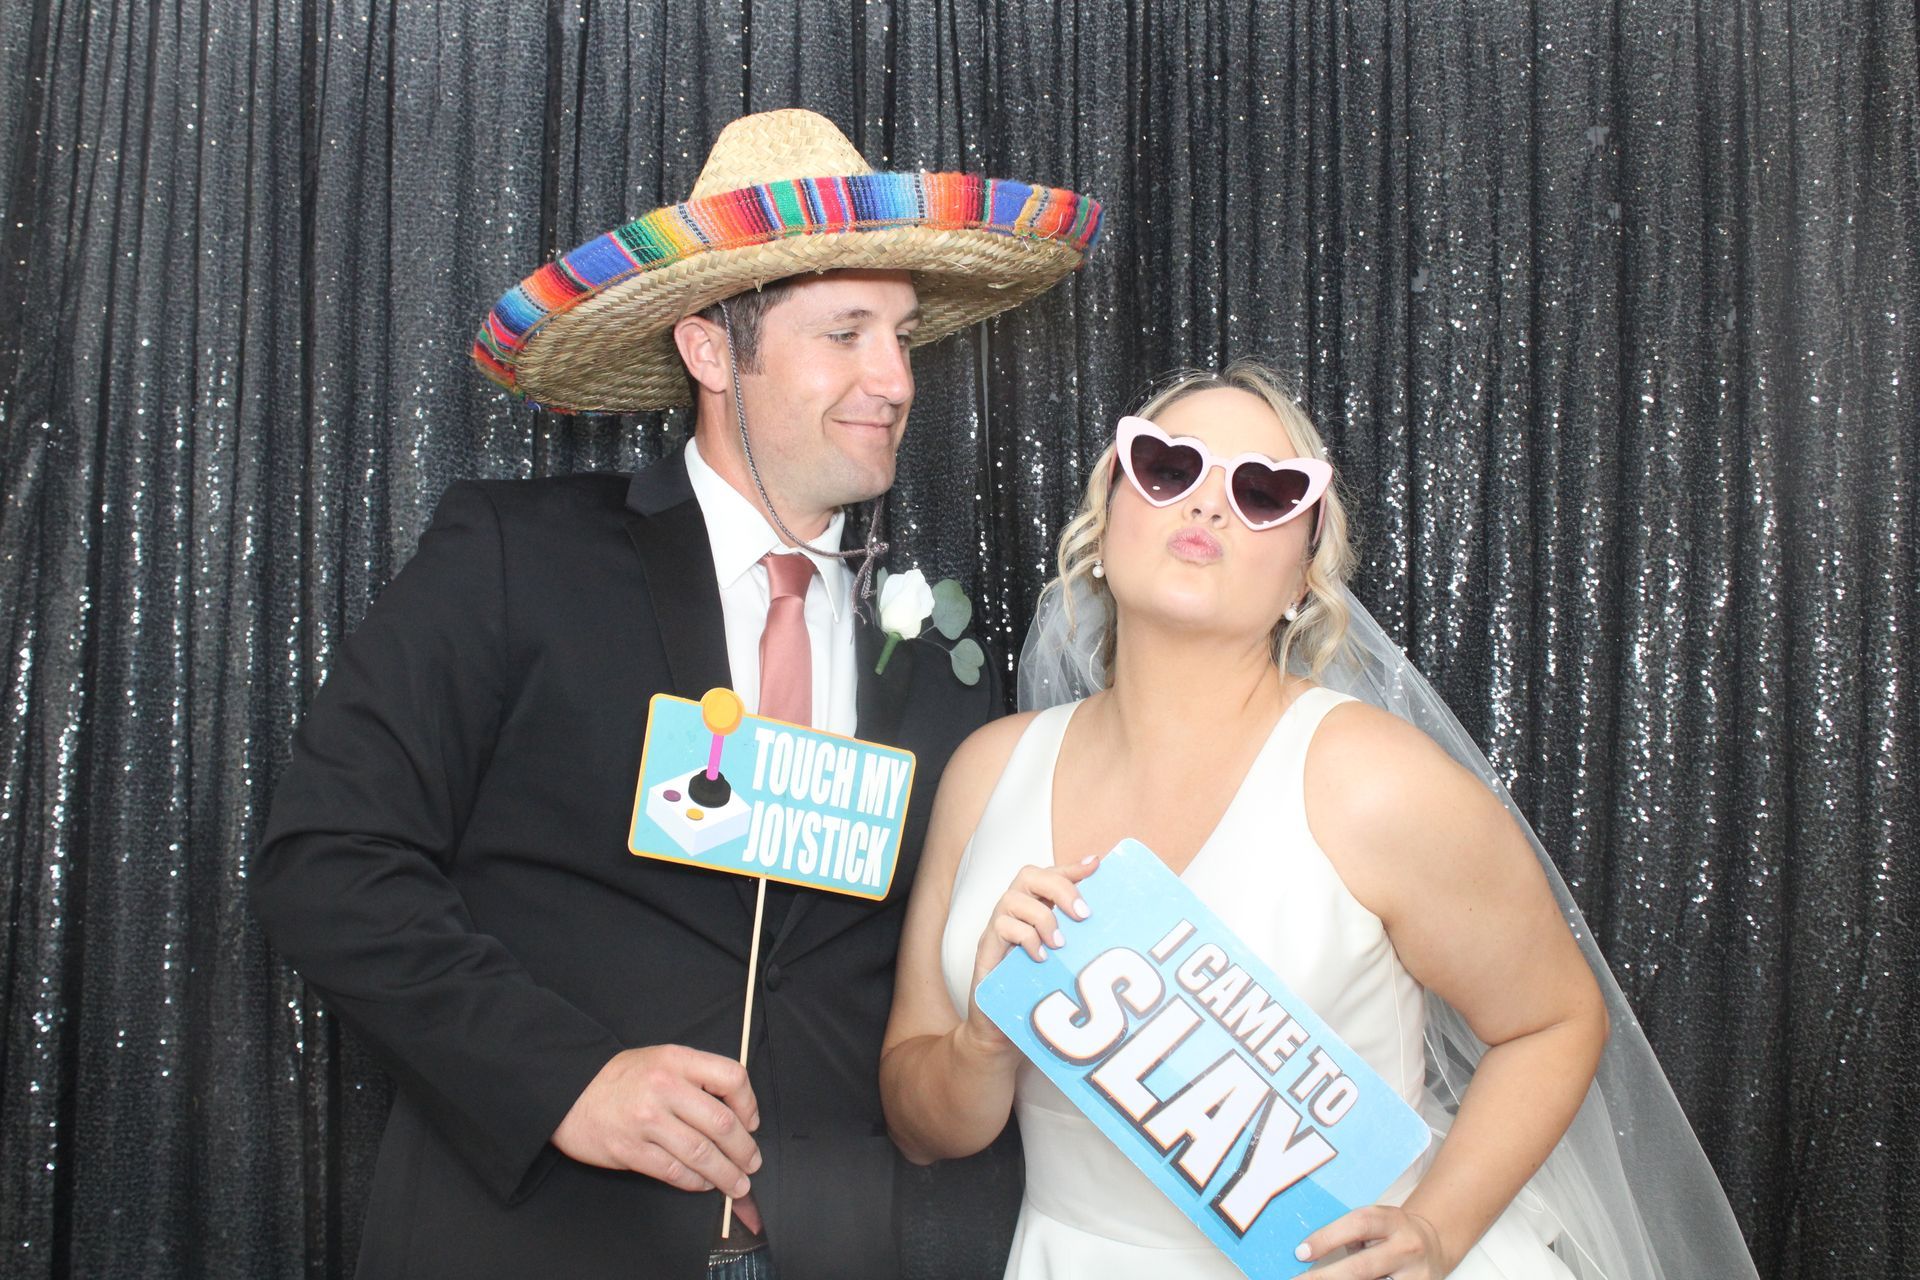 Bride and groom using photo booth at Houston wedding reception